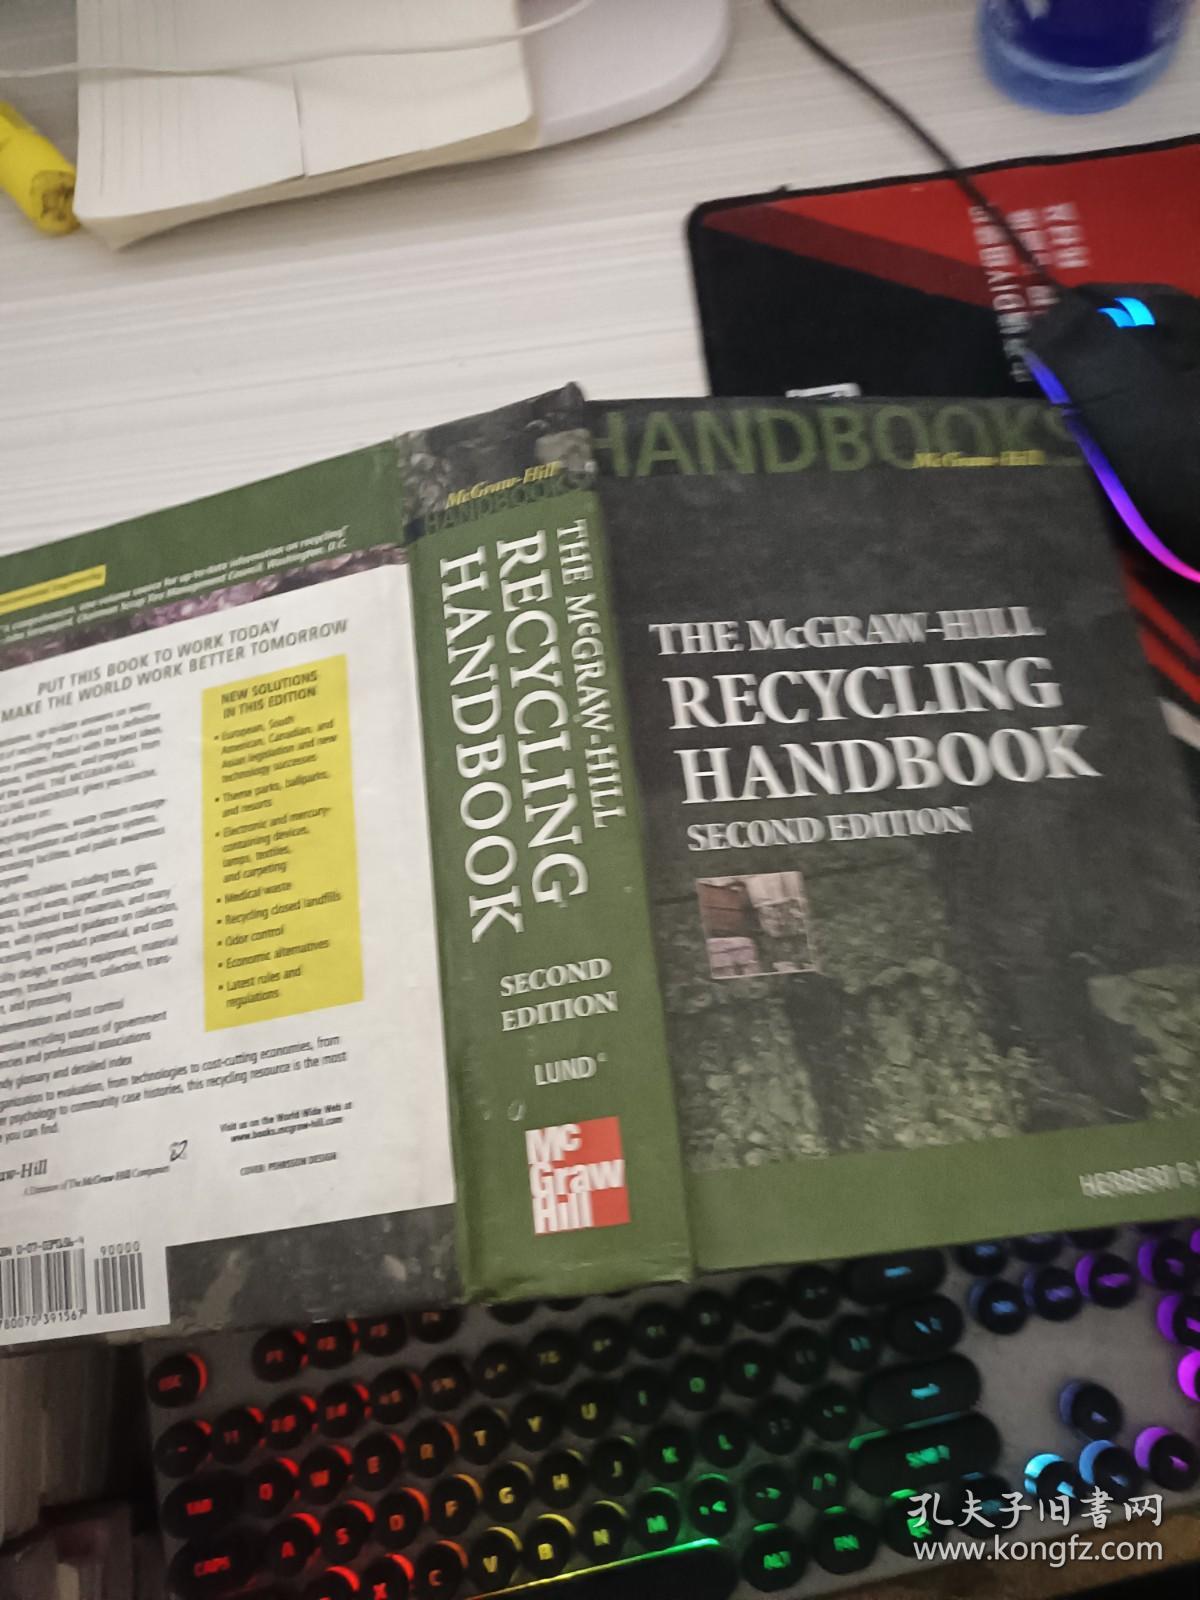 THE MCGR AW HILL RECYCLING HANDBOOK